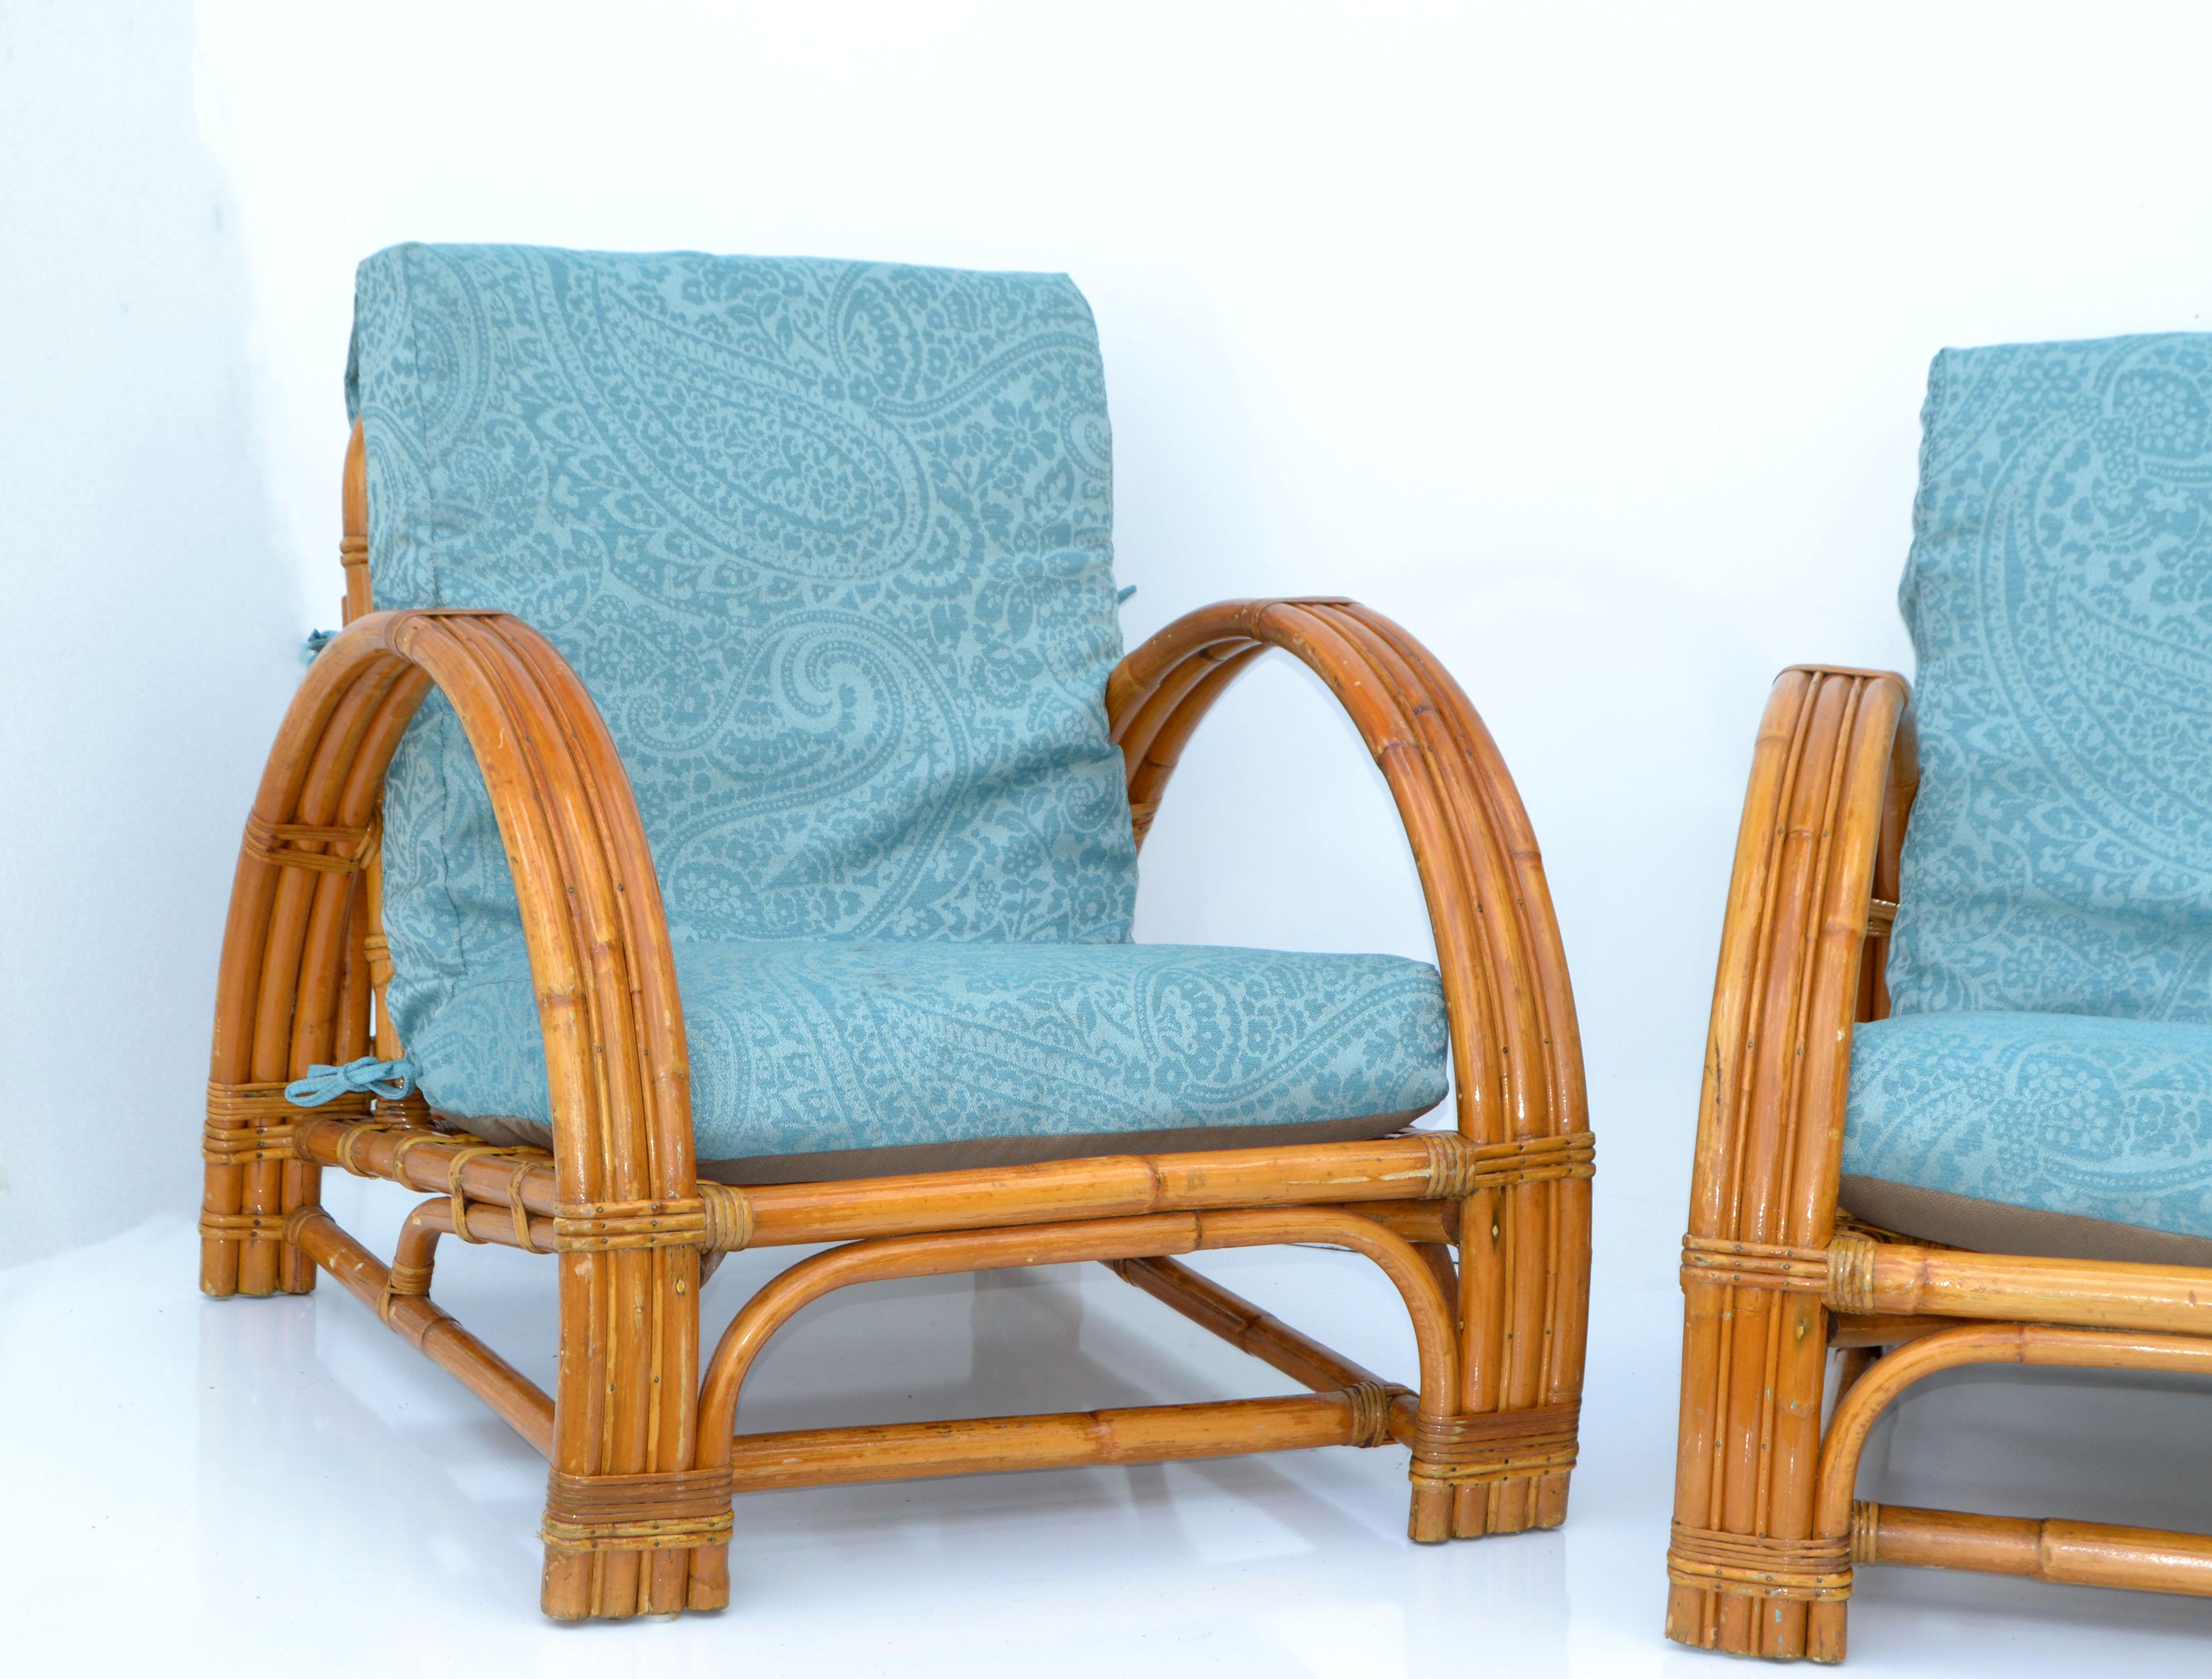 Hand-Crafted Calif Asia 4 Piece Seating Set Bamboo Sofa & Lounge Chair Turquoise Upholstery